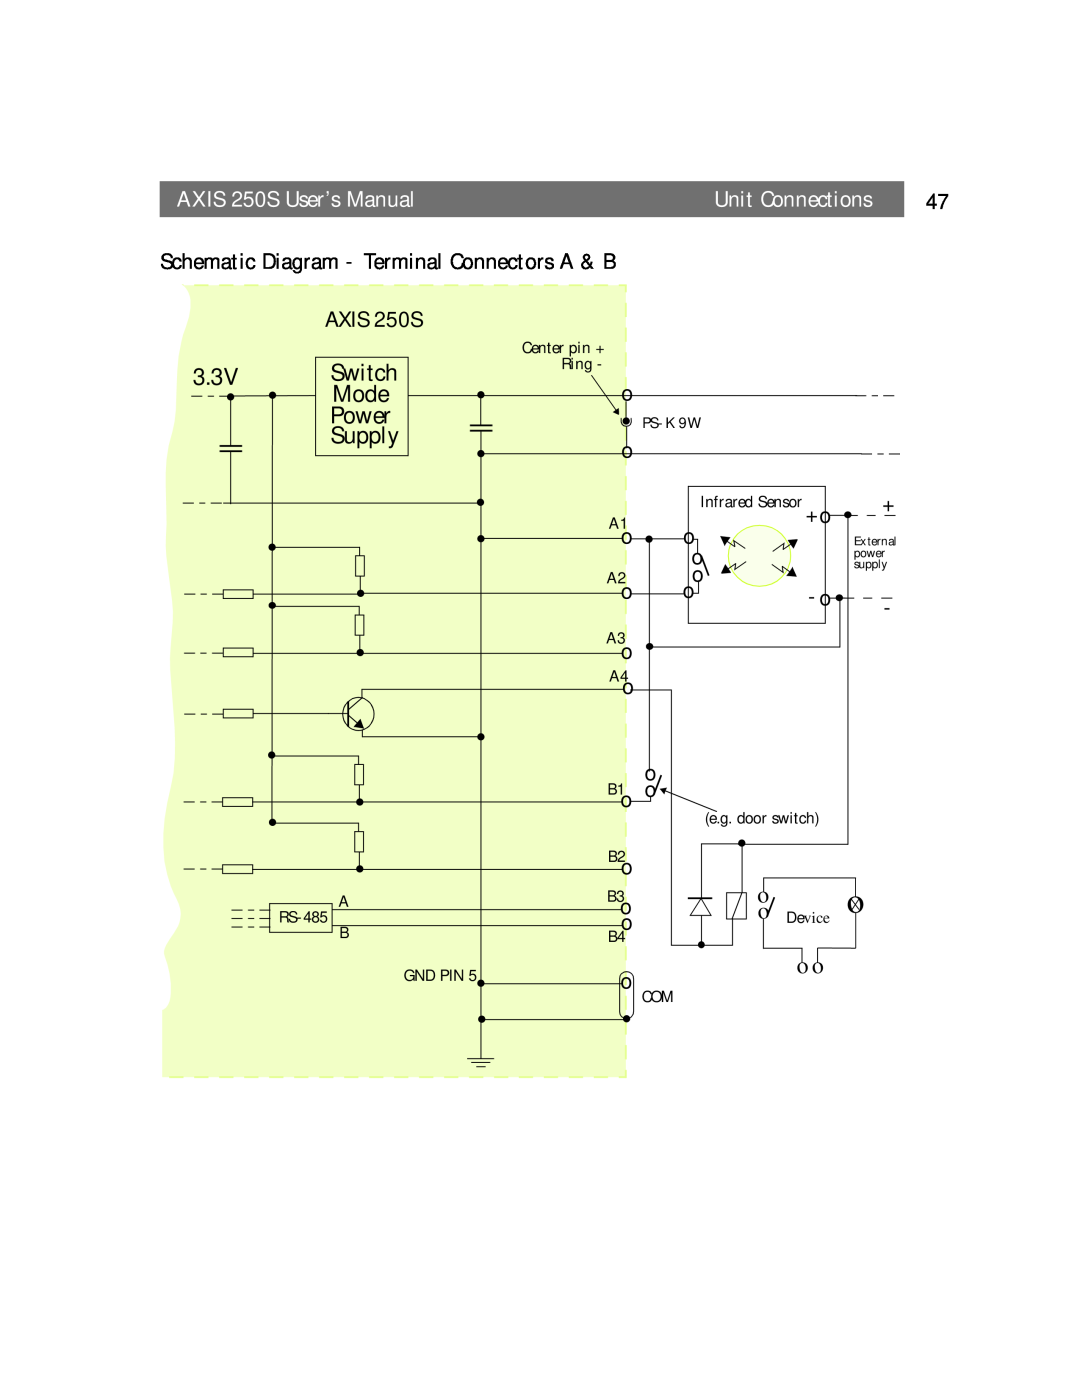 Axis Communications Schematic Diagram - Terminal Connectors A & B, AXIS 250S, Switch, Mode, Power, Supply, 3.3V 